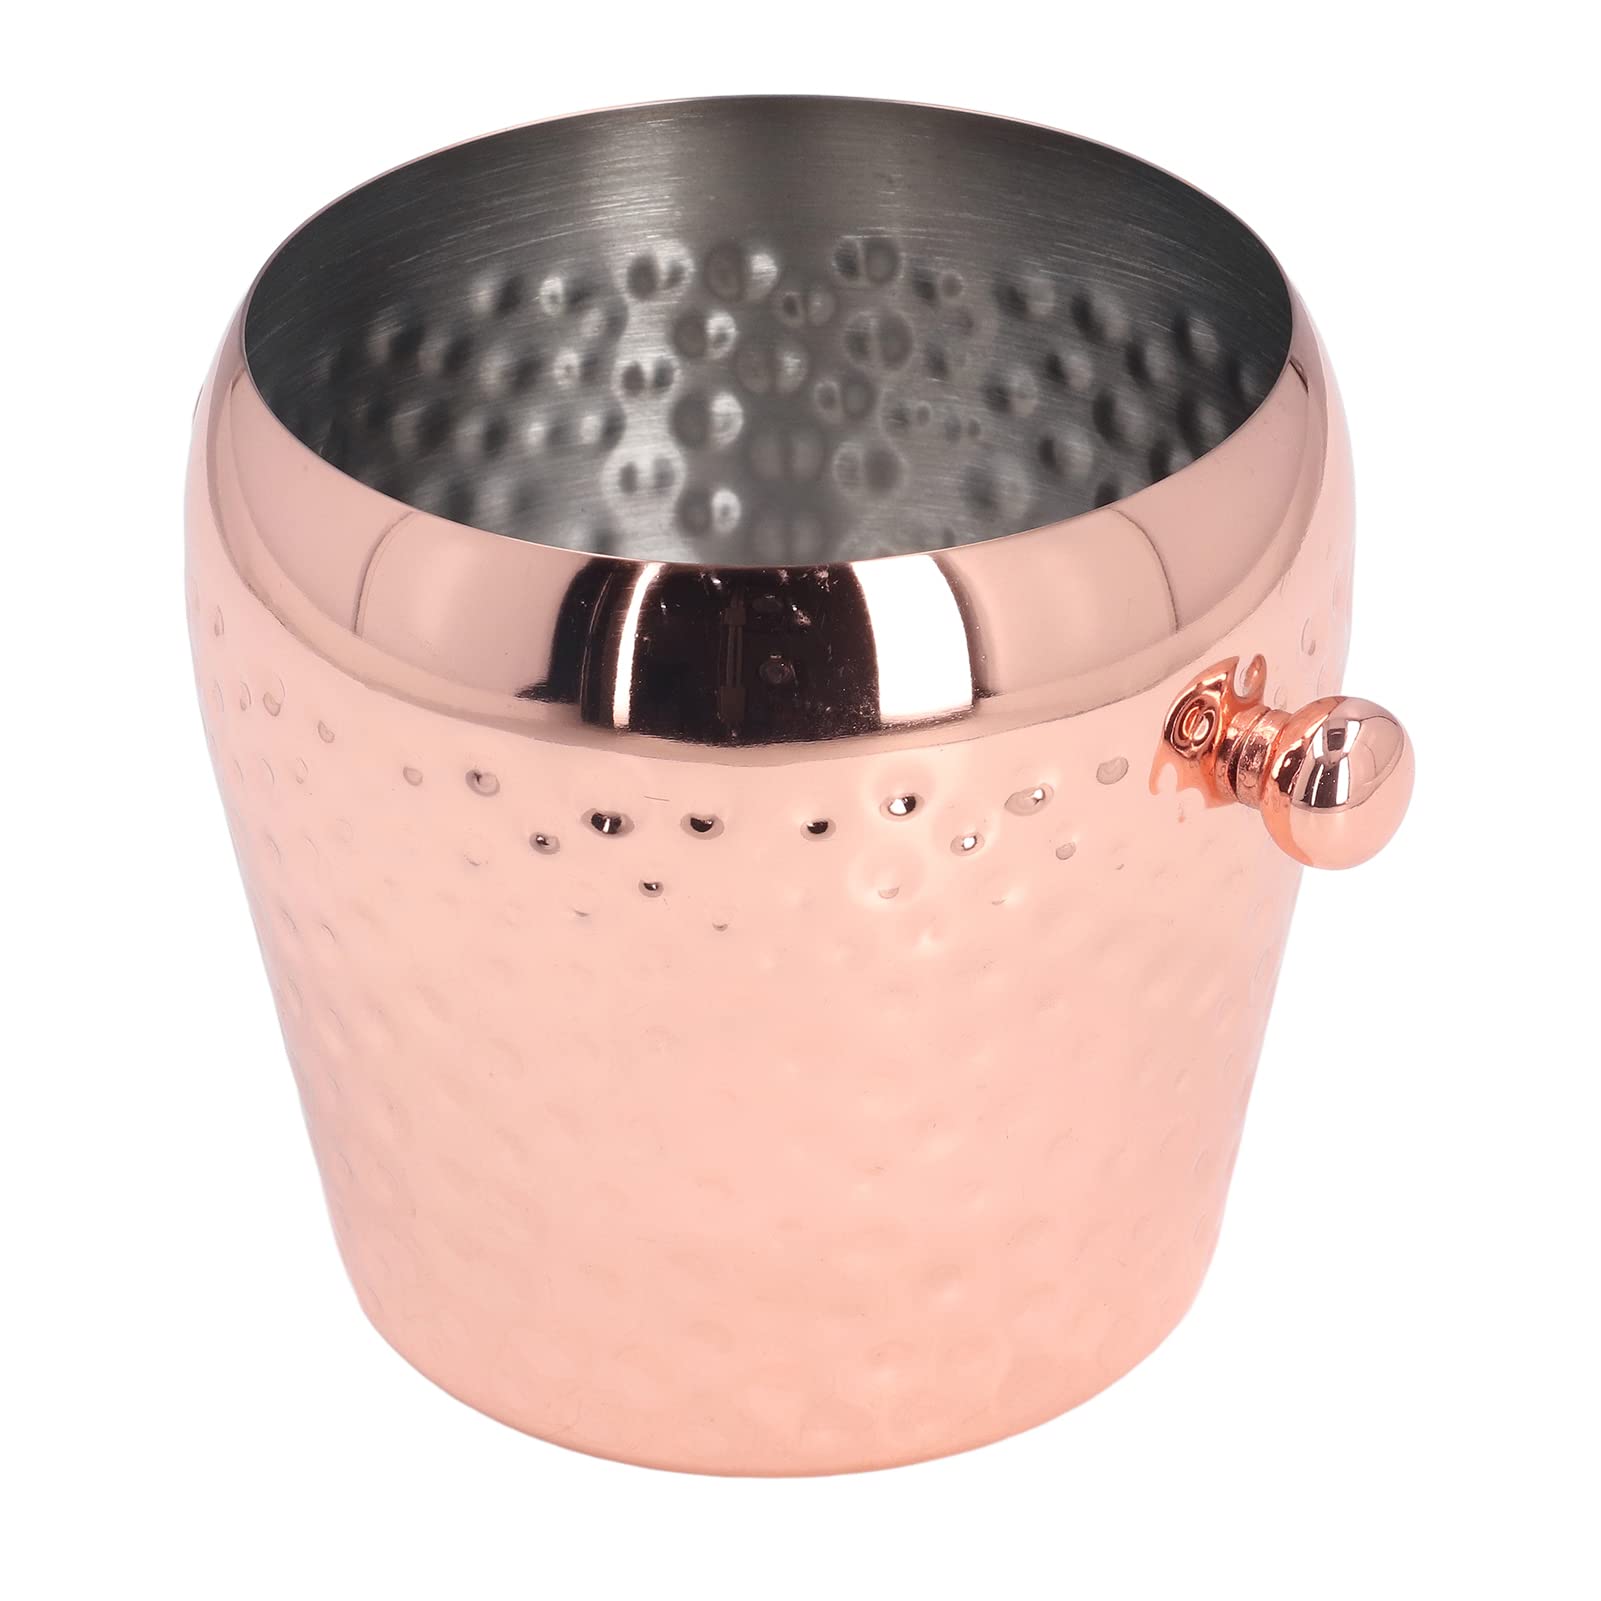 BuyWeek Ice Bucket, 1000ml Champagne Bucket 10.9 x 8.8 x 11.5cm Stainless Steel Wine Bucket Portable Beer Chiller Bucket for Bar Party Club(Rose Gold)